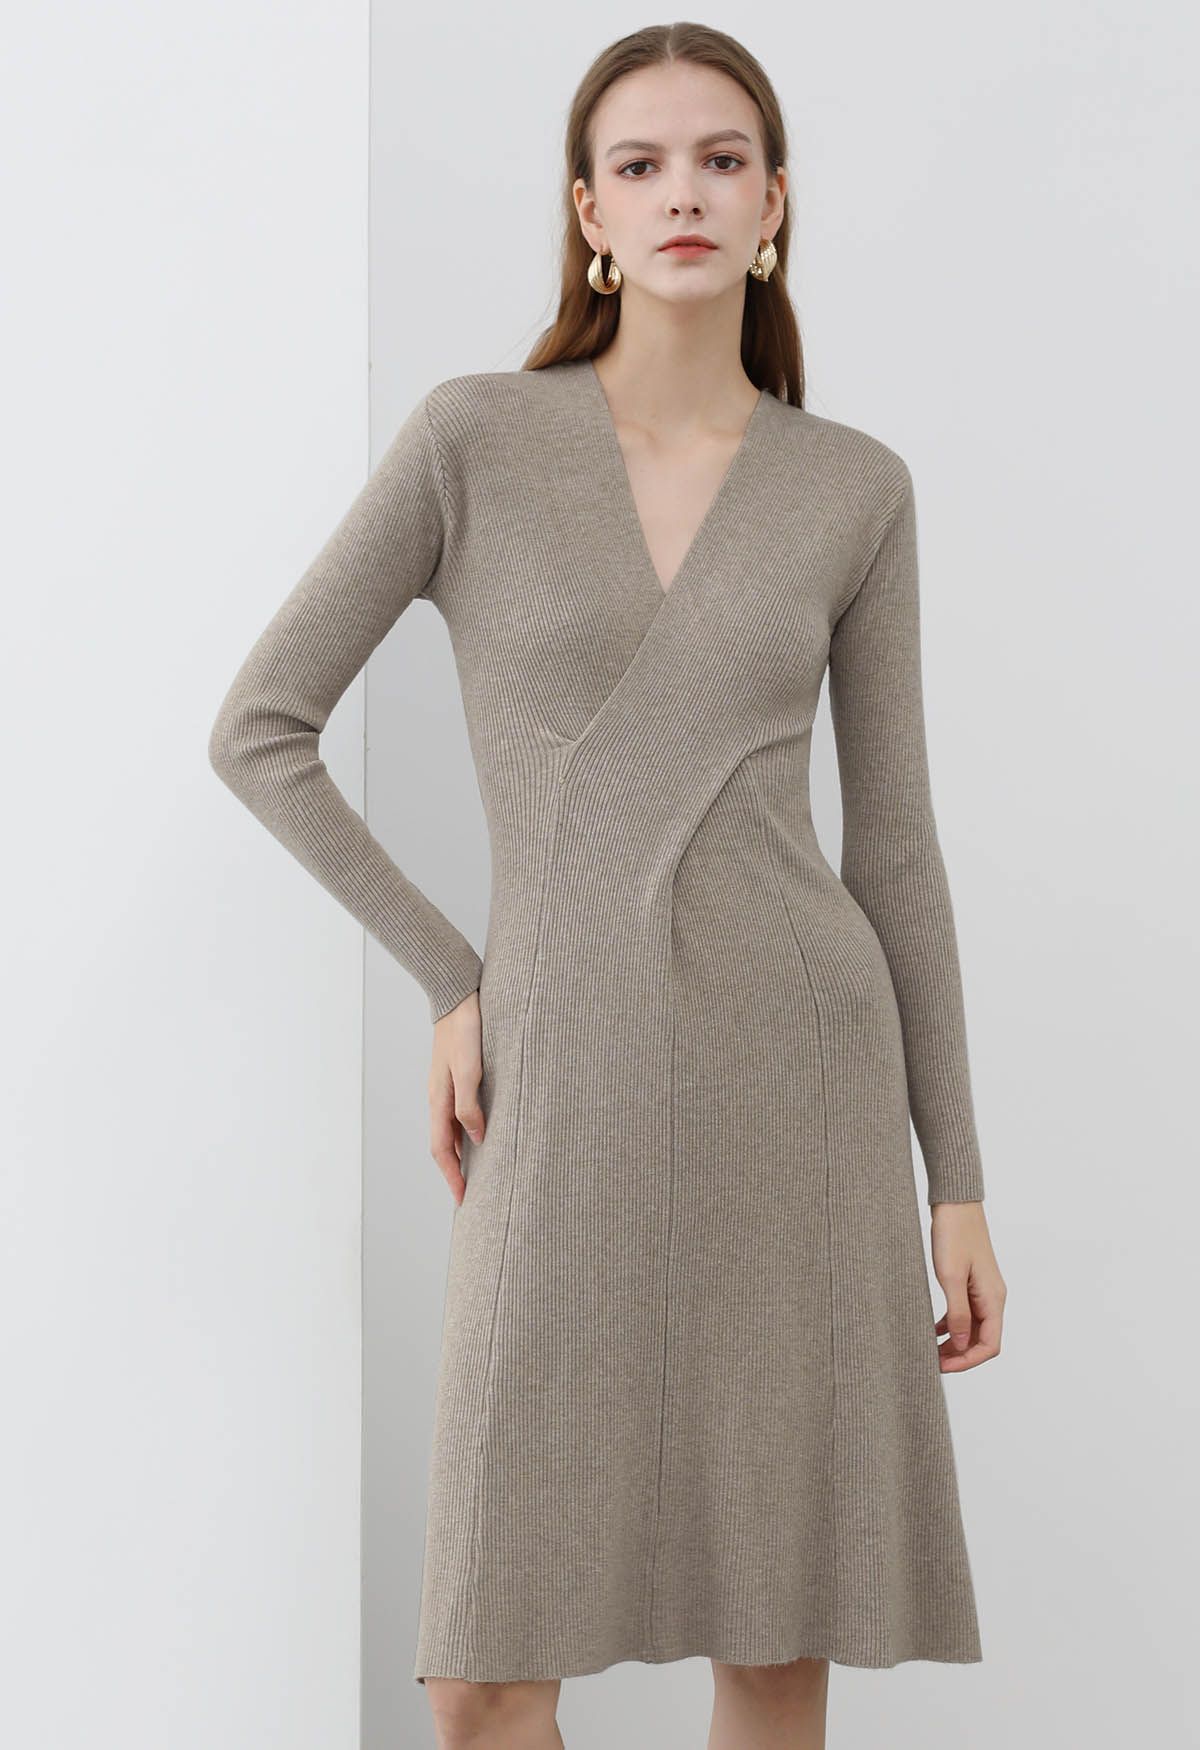 Criss Cross Waist Halter Knit Dress in Oatmeal - Retro, Indie and Unique  Fashion